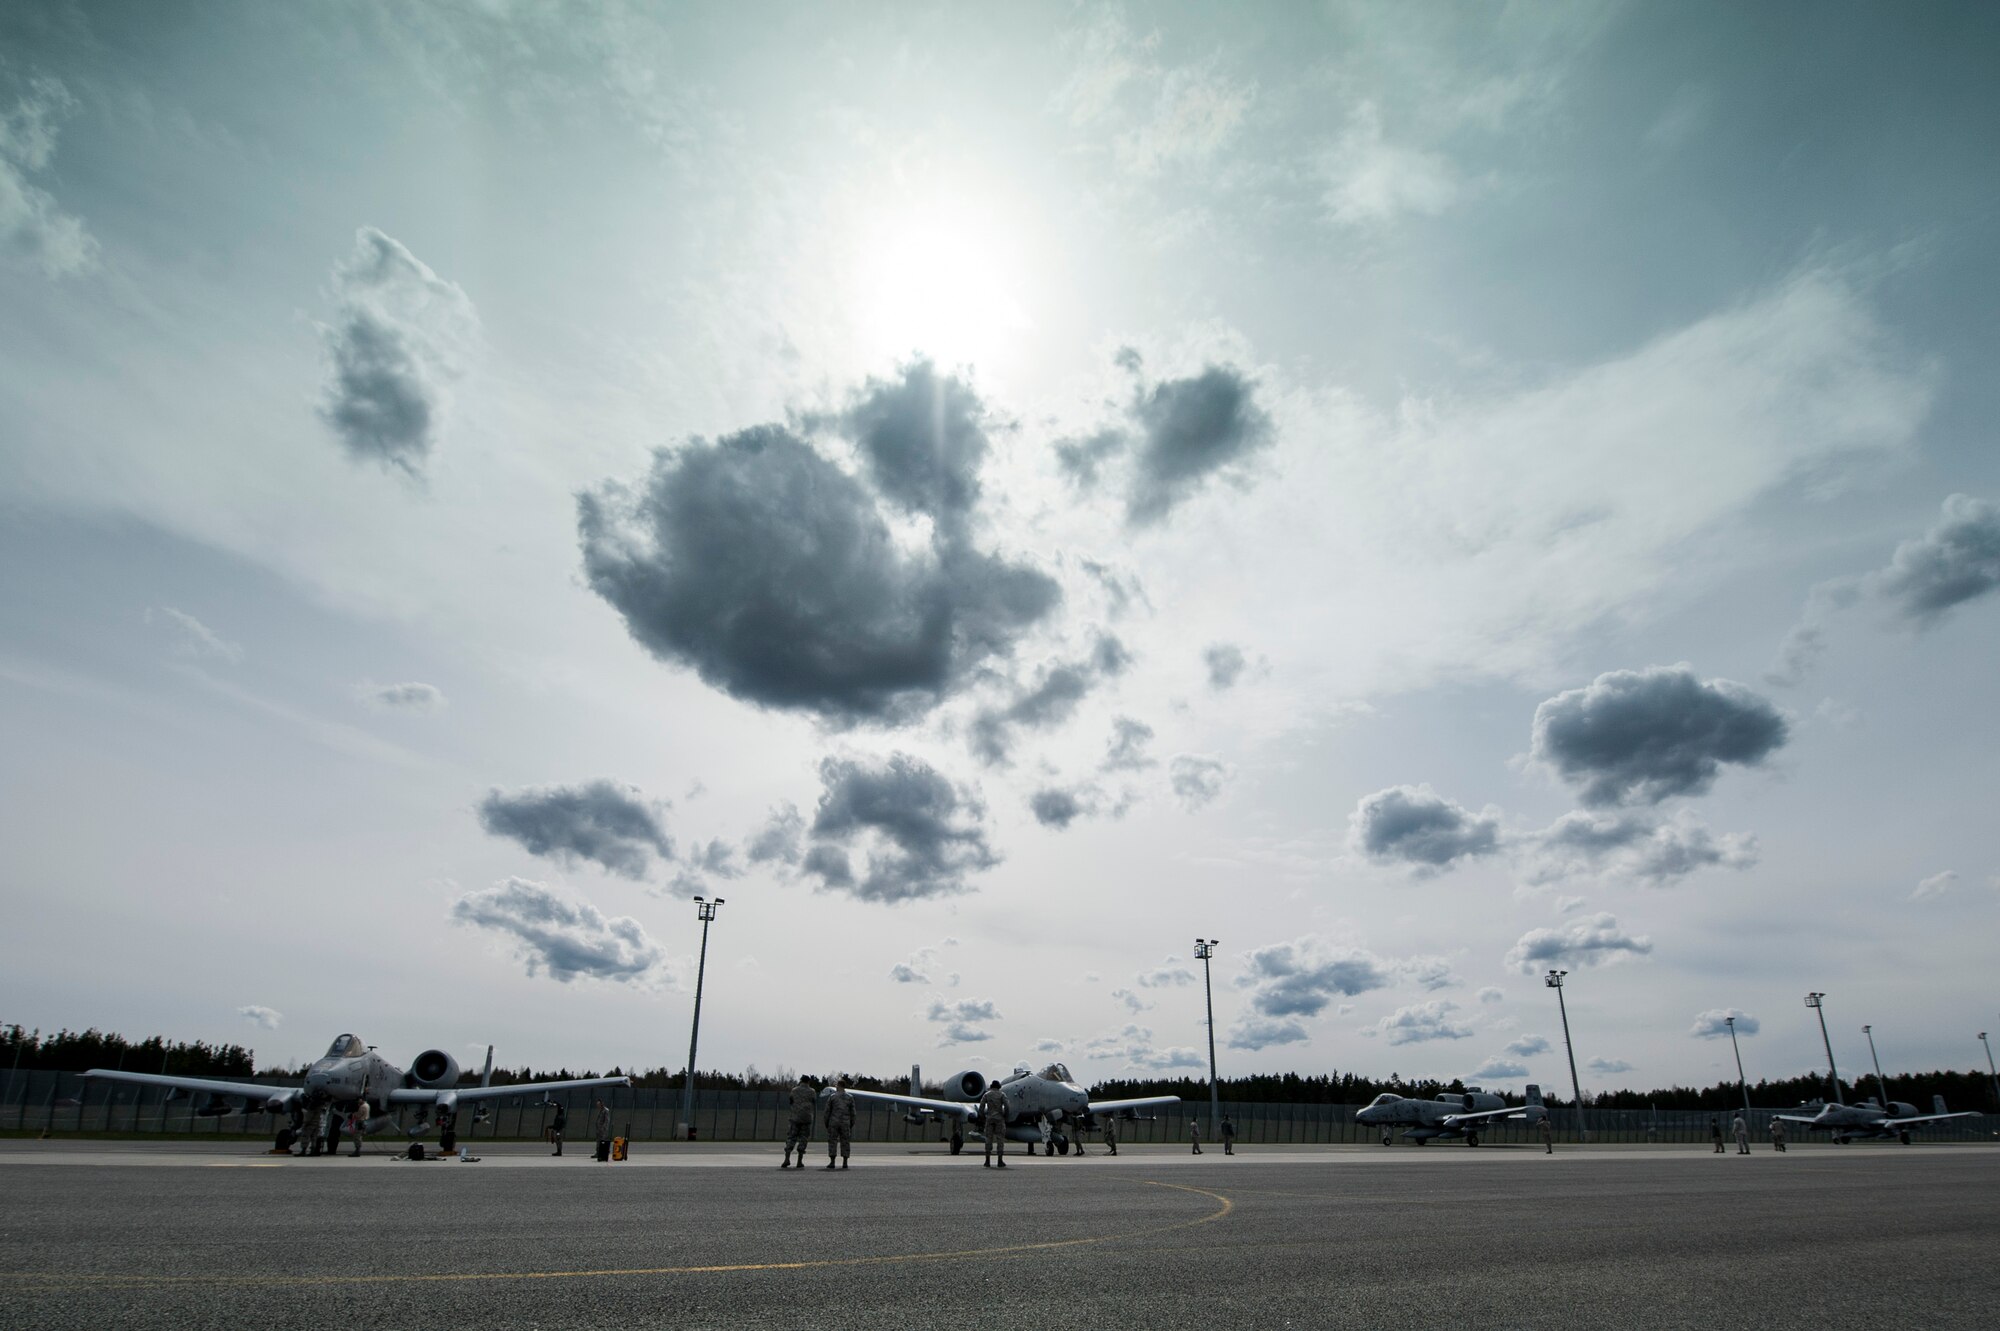 A-10 Thunderbolt II attack aircraft are marshaled to their parking spots on the flightline, May 1, 2015, at Ämari Air Base, Estonia. The aircraft will forward deploy to locations in Eastern European NATO countries as part of the theater TSP.  (U.S. Air Force photo by Senior Airman Rusty Frank/Released)